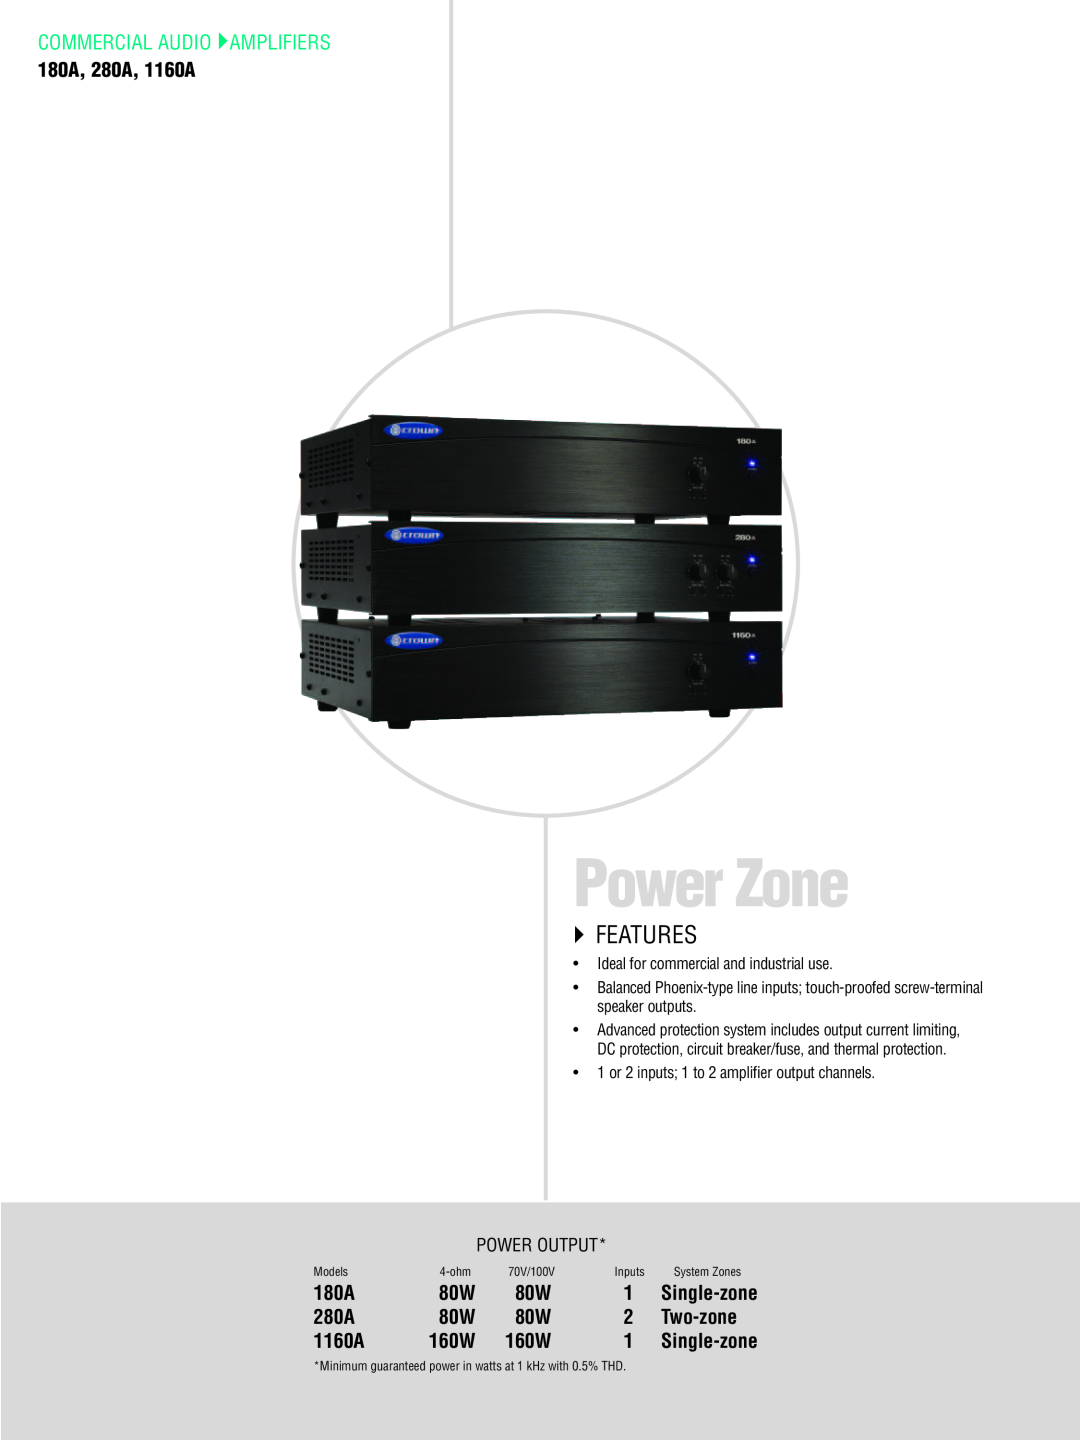 Crown CTS 1200, CTS 3000 Power Zone, Commercial Audio Amplifiers, `` Features, 180A, 280A, 1160A, Two-zone, Power Output 